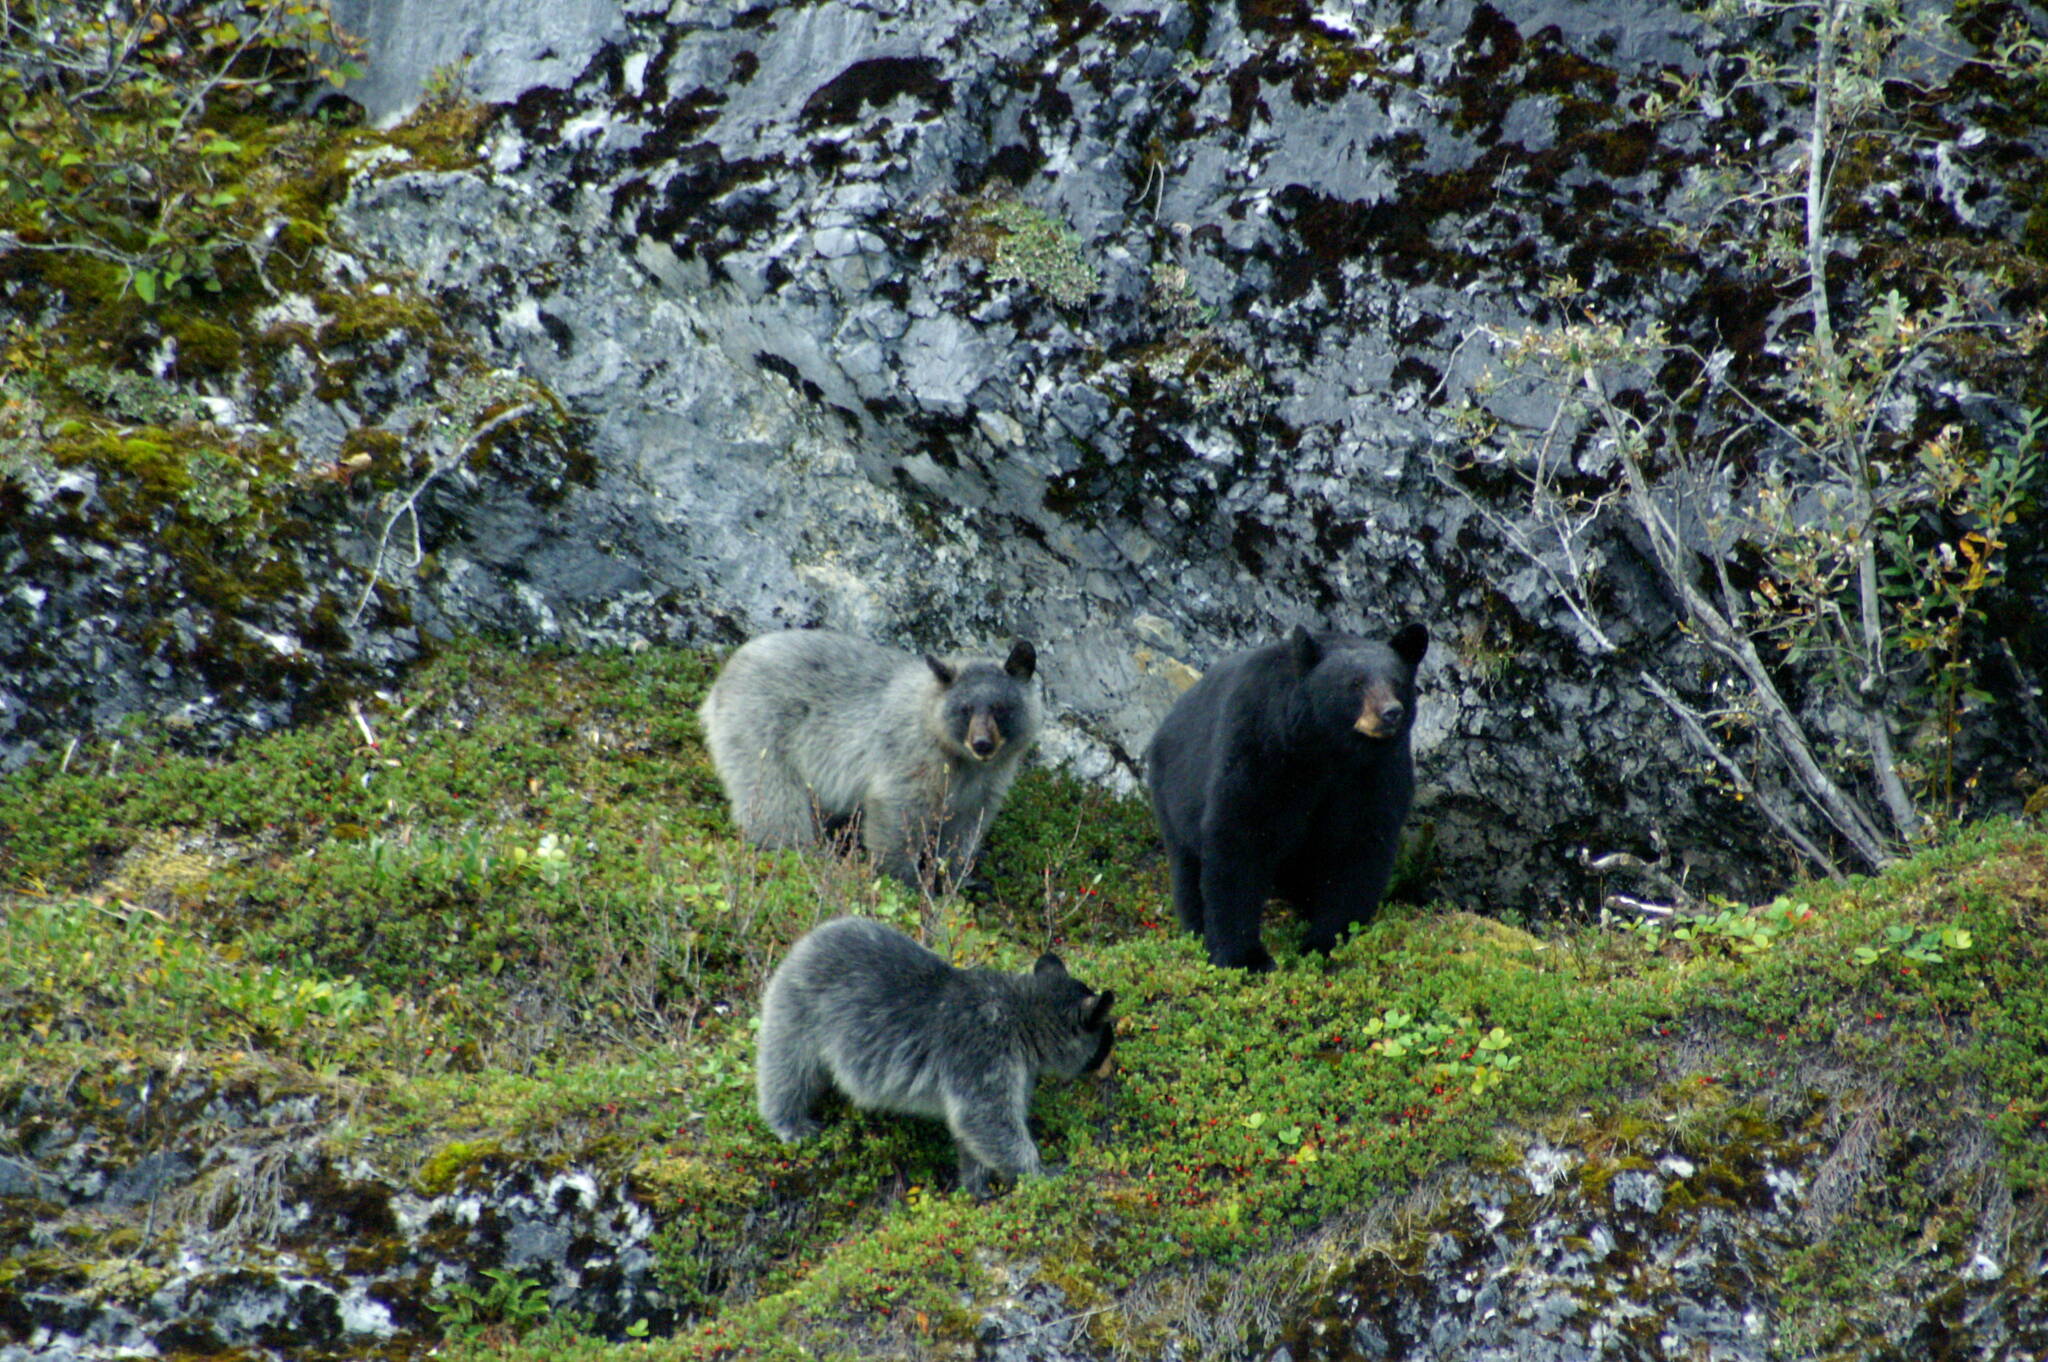 Black bears with more typical coloration can produce offspring with grayish coats. Bears with with the coloring are known as glacier bears. There are multiple theories for why the bears have their unusual coloration. They include a potential camouflage advantage in icy terrain and possibly an advantage when catching salmon. (Courtesy Photo / Cody Edwards)